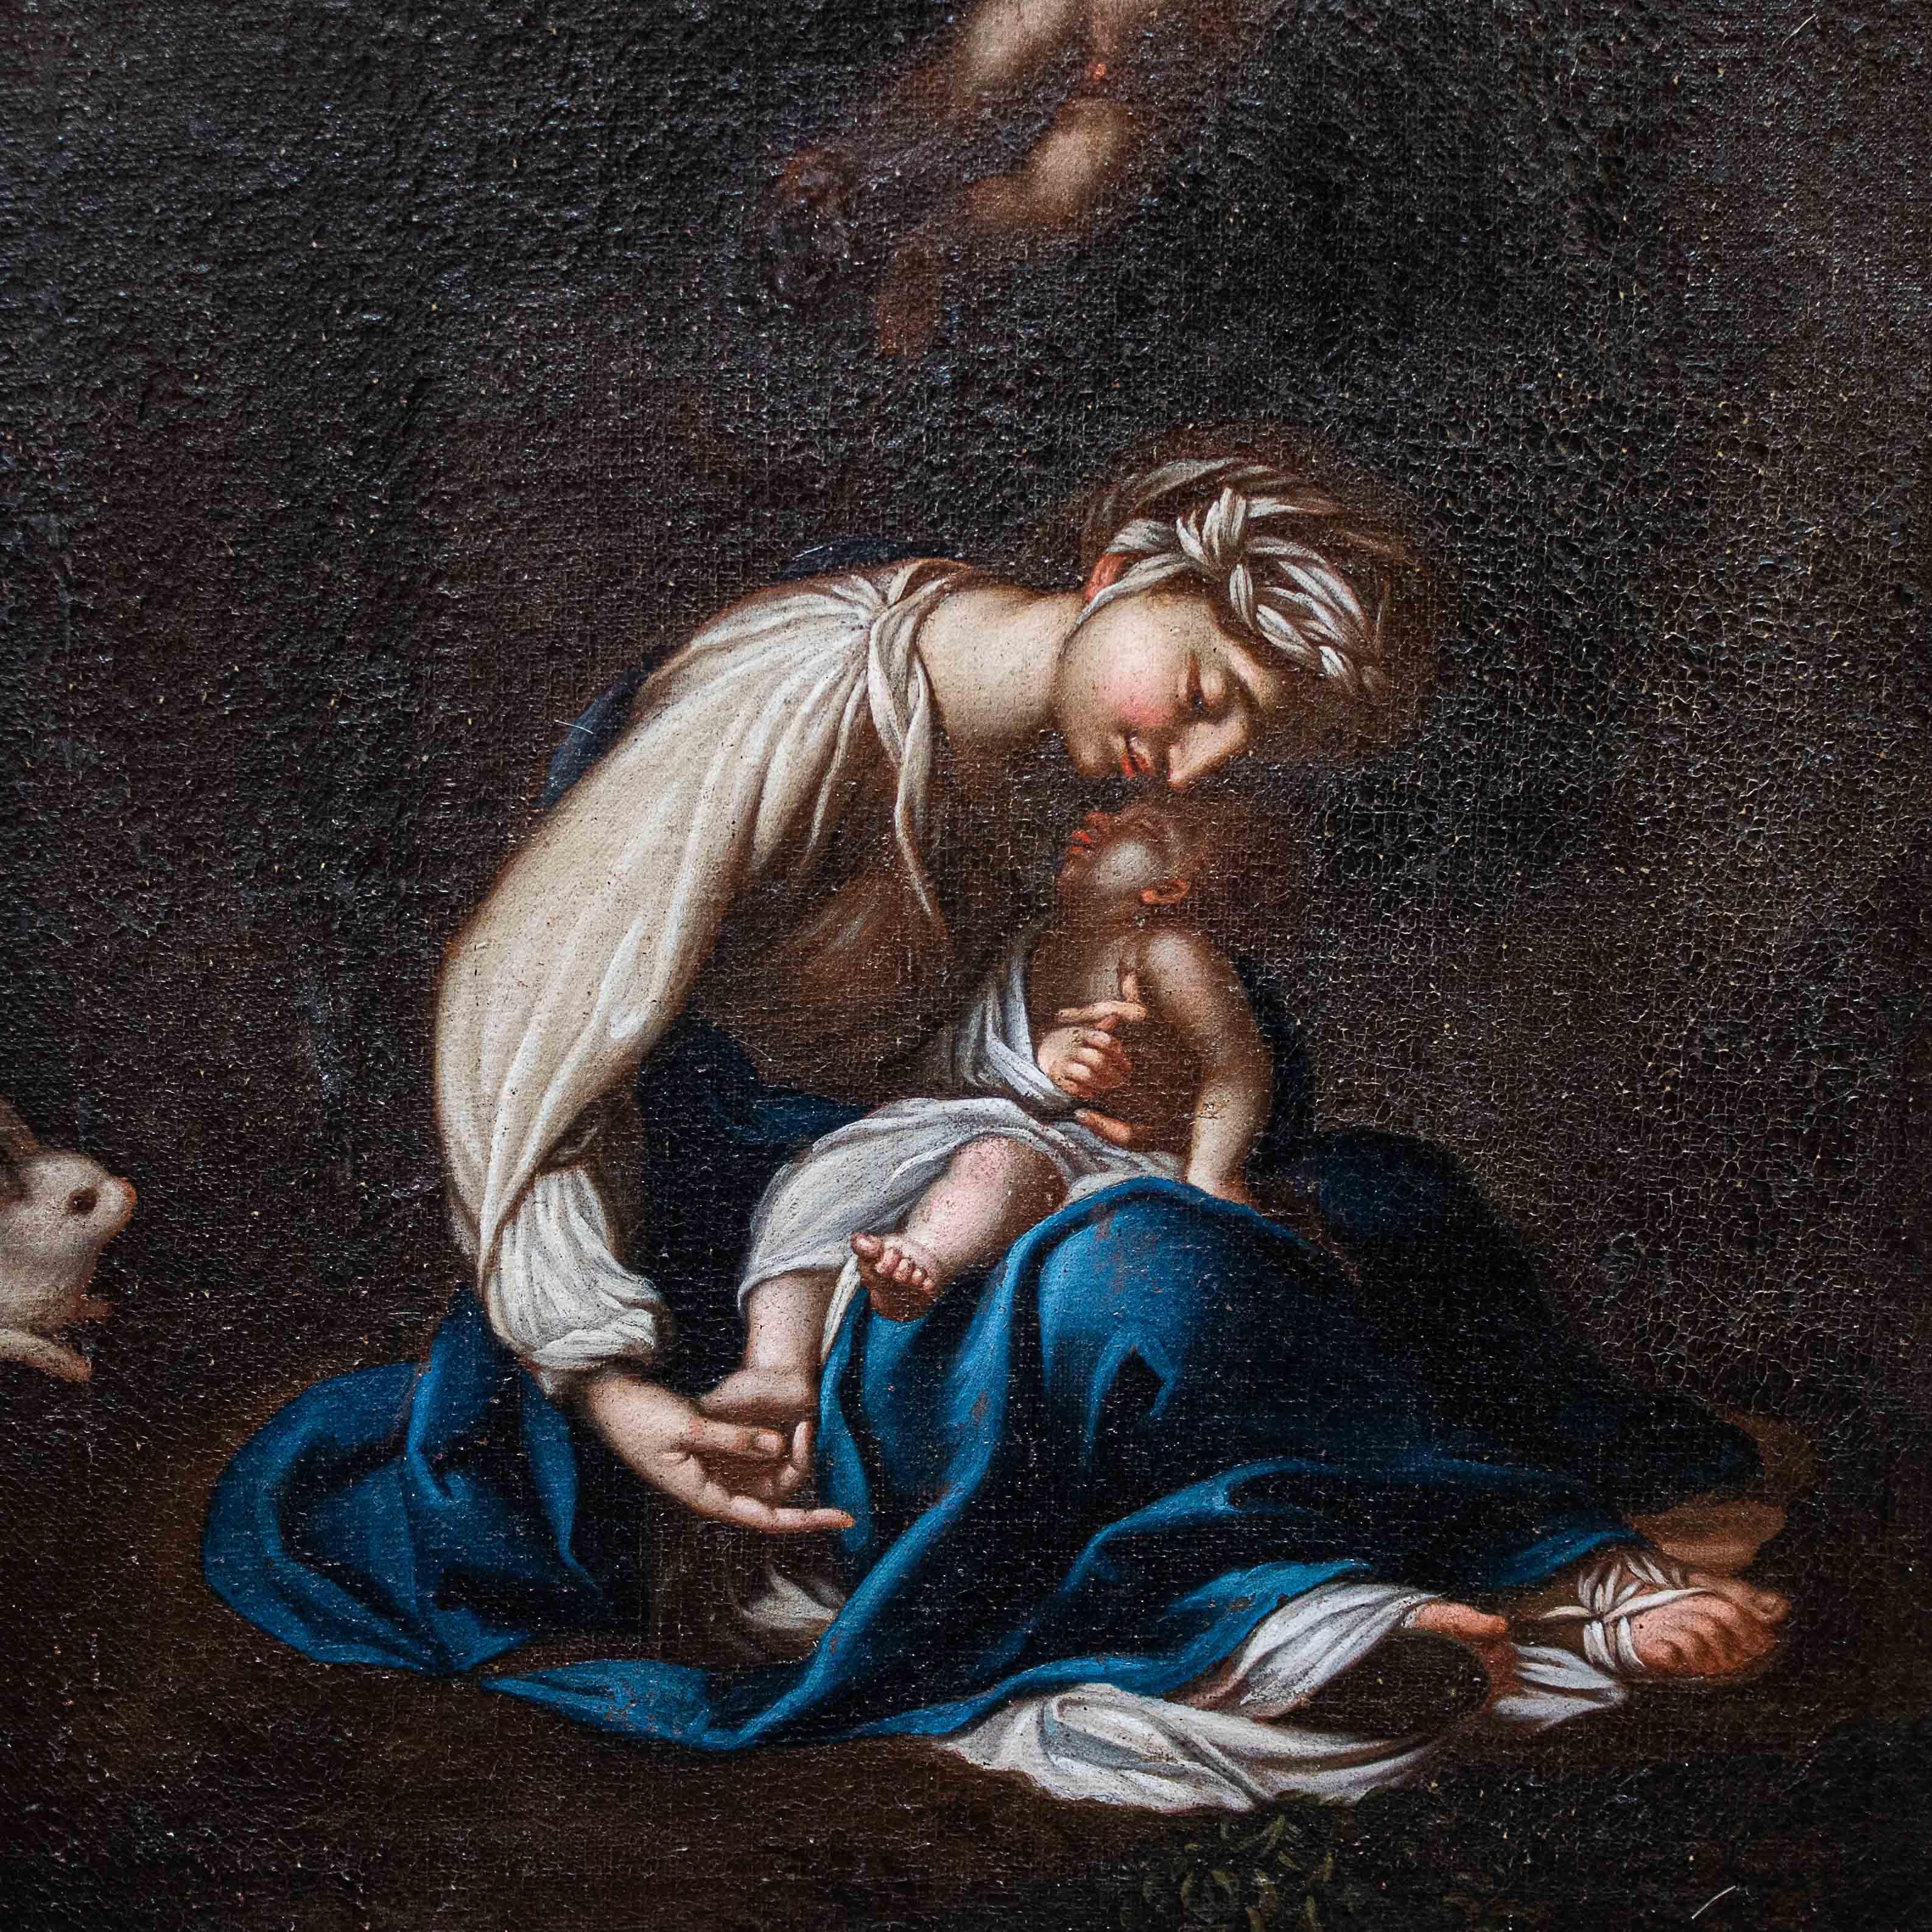 16th Century Madonna with Child Painting Oil on Canvas by Follower of Correggio 1